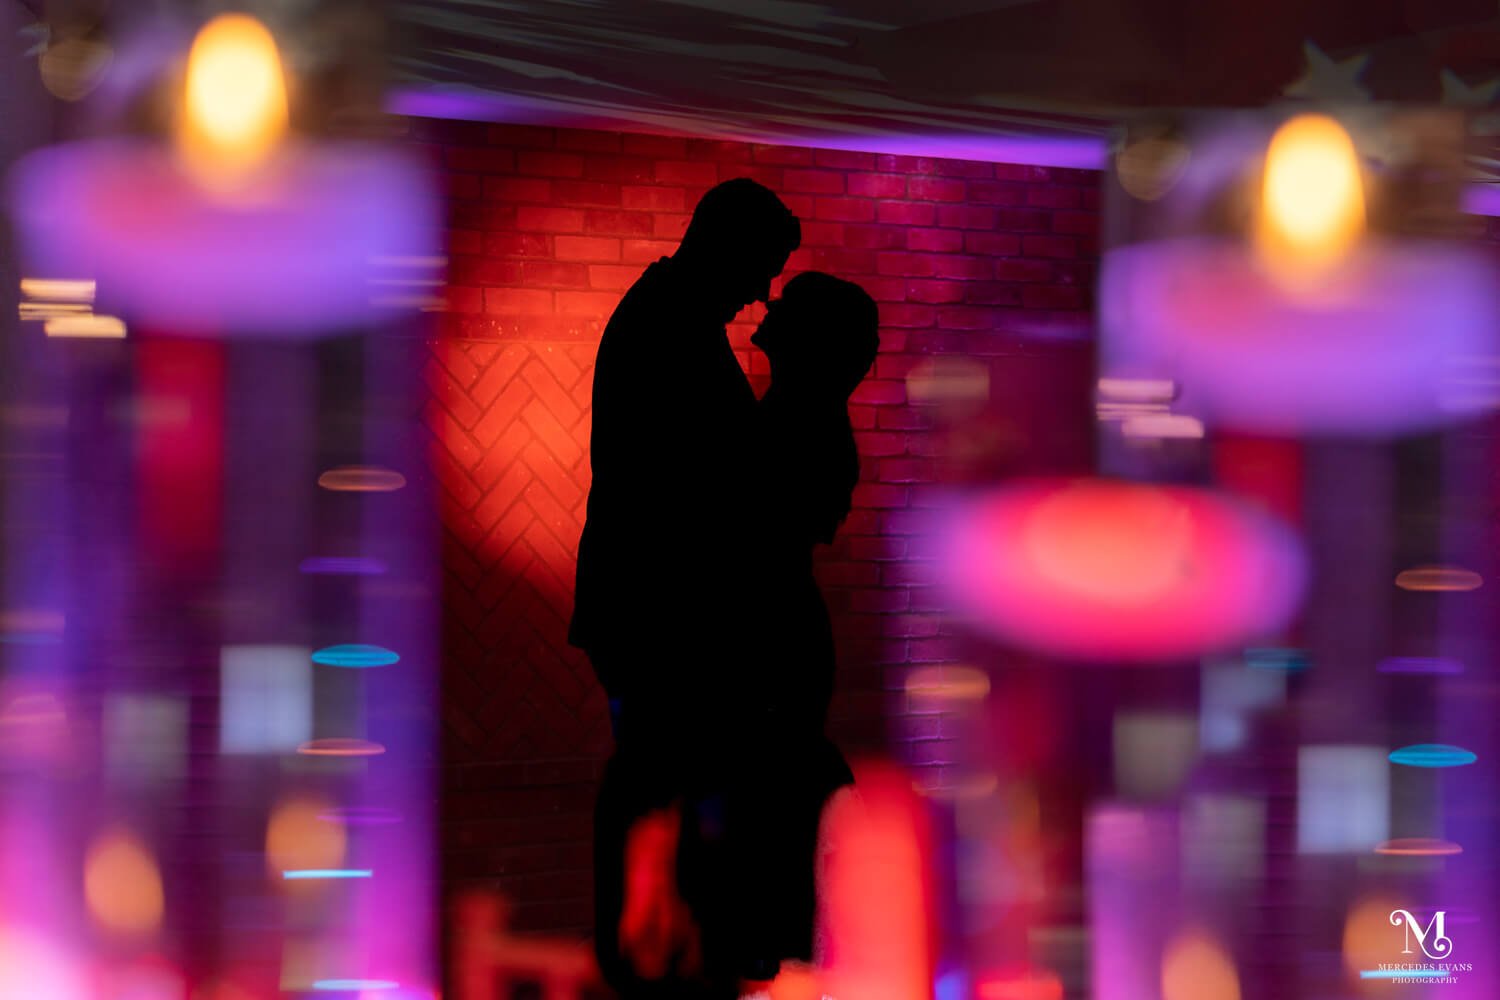 the bride and groom are silhouetted against a red lit wall and in the foreground are red, blue, purple and gold shapes